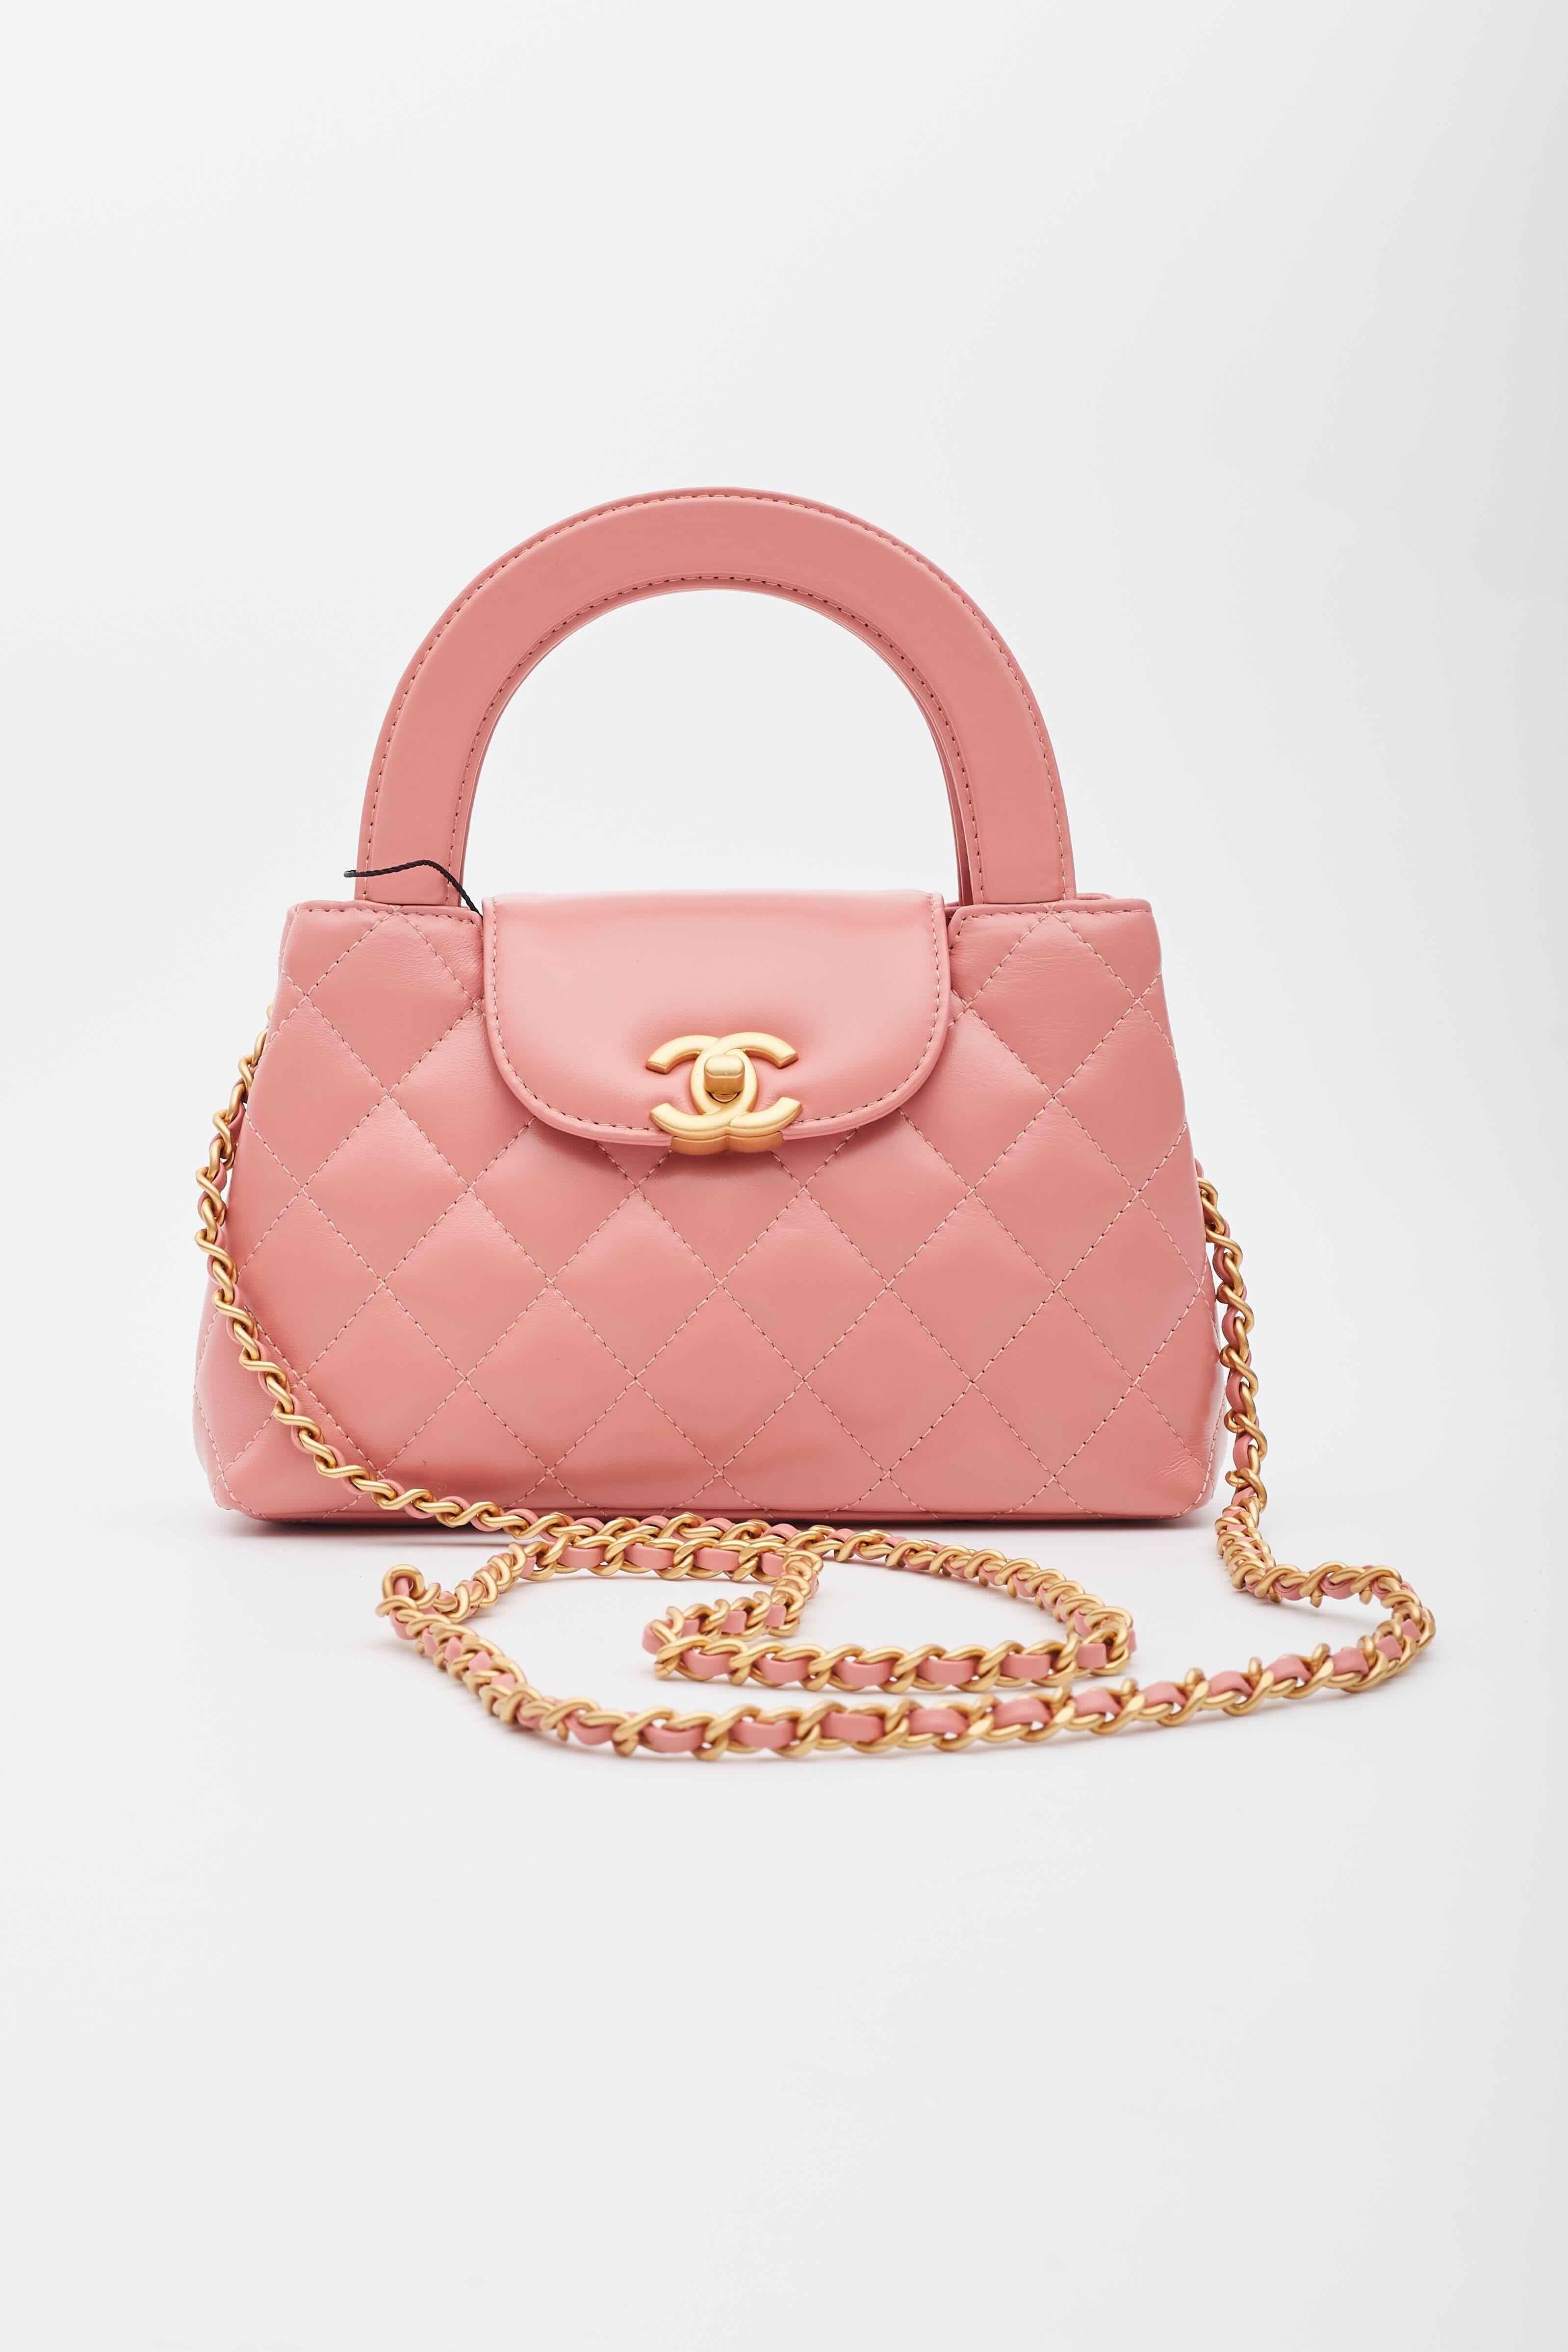 Chanel Top Handle Bag. From the Fall/Winter 2023 Collection by Virginie Viard. This mini bag is a twist on an archival Chanel bag, featuring a long crossbody chain strap. This dual top handle bag is quilted in shiny aged calfskin leather in pink,